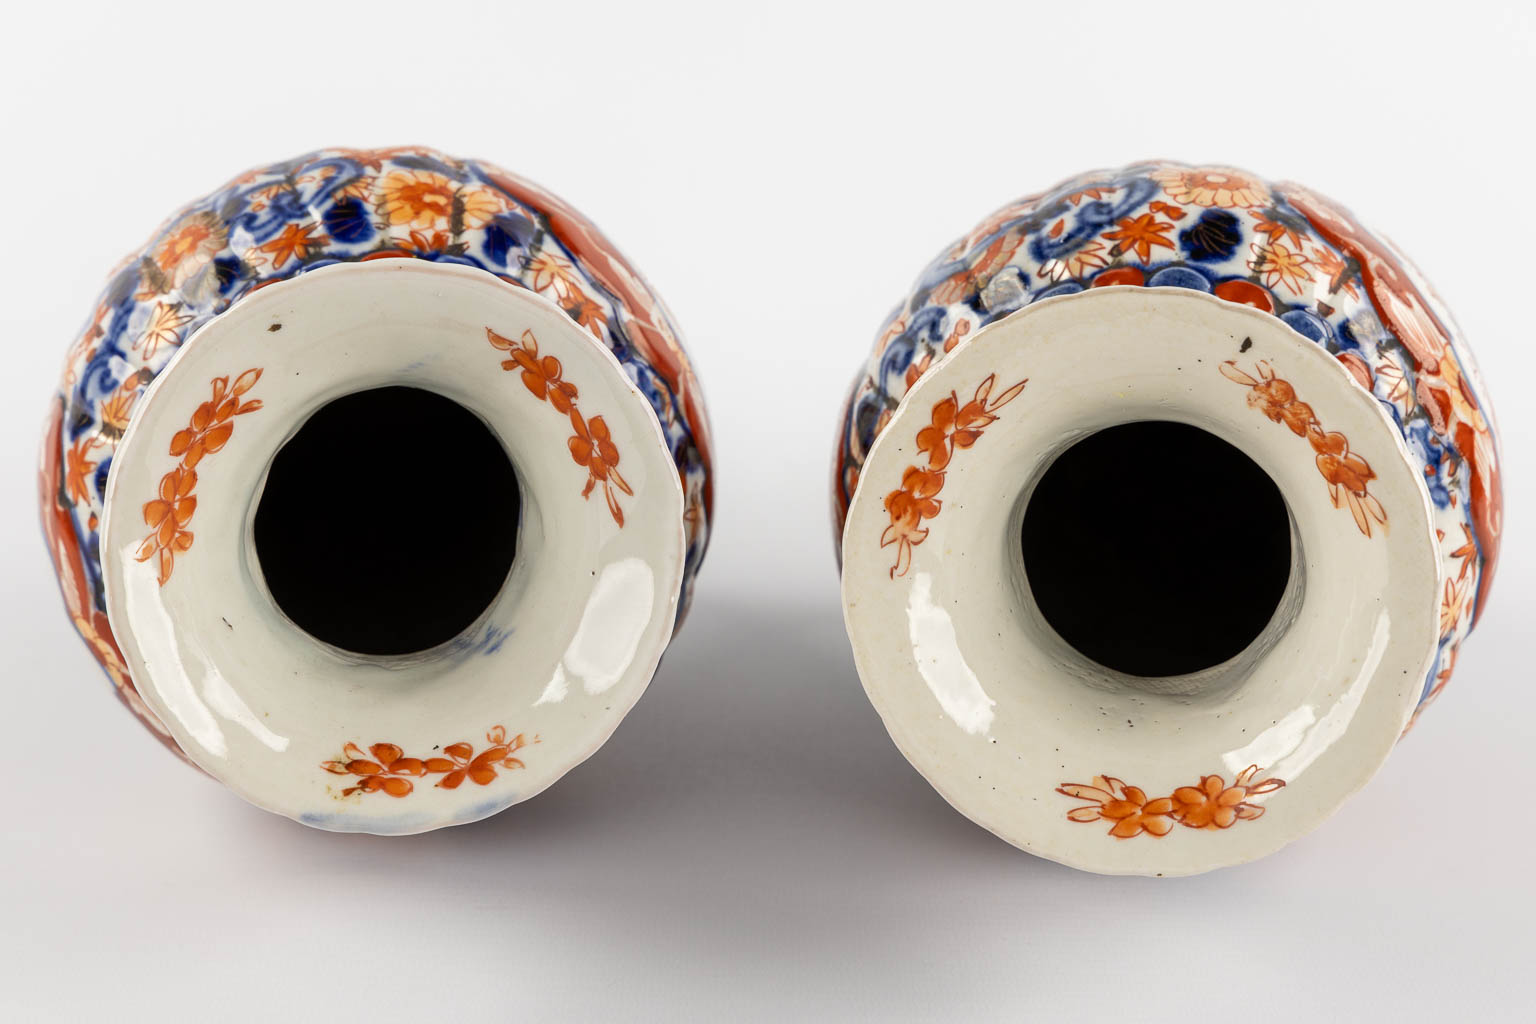 A pair of vases and a bowl, Japanese Imari porcelain. (H:25 x D:14 cm) - Image 8 of 11